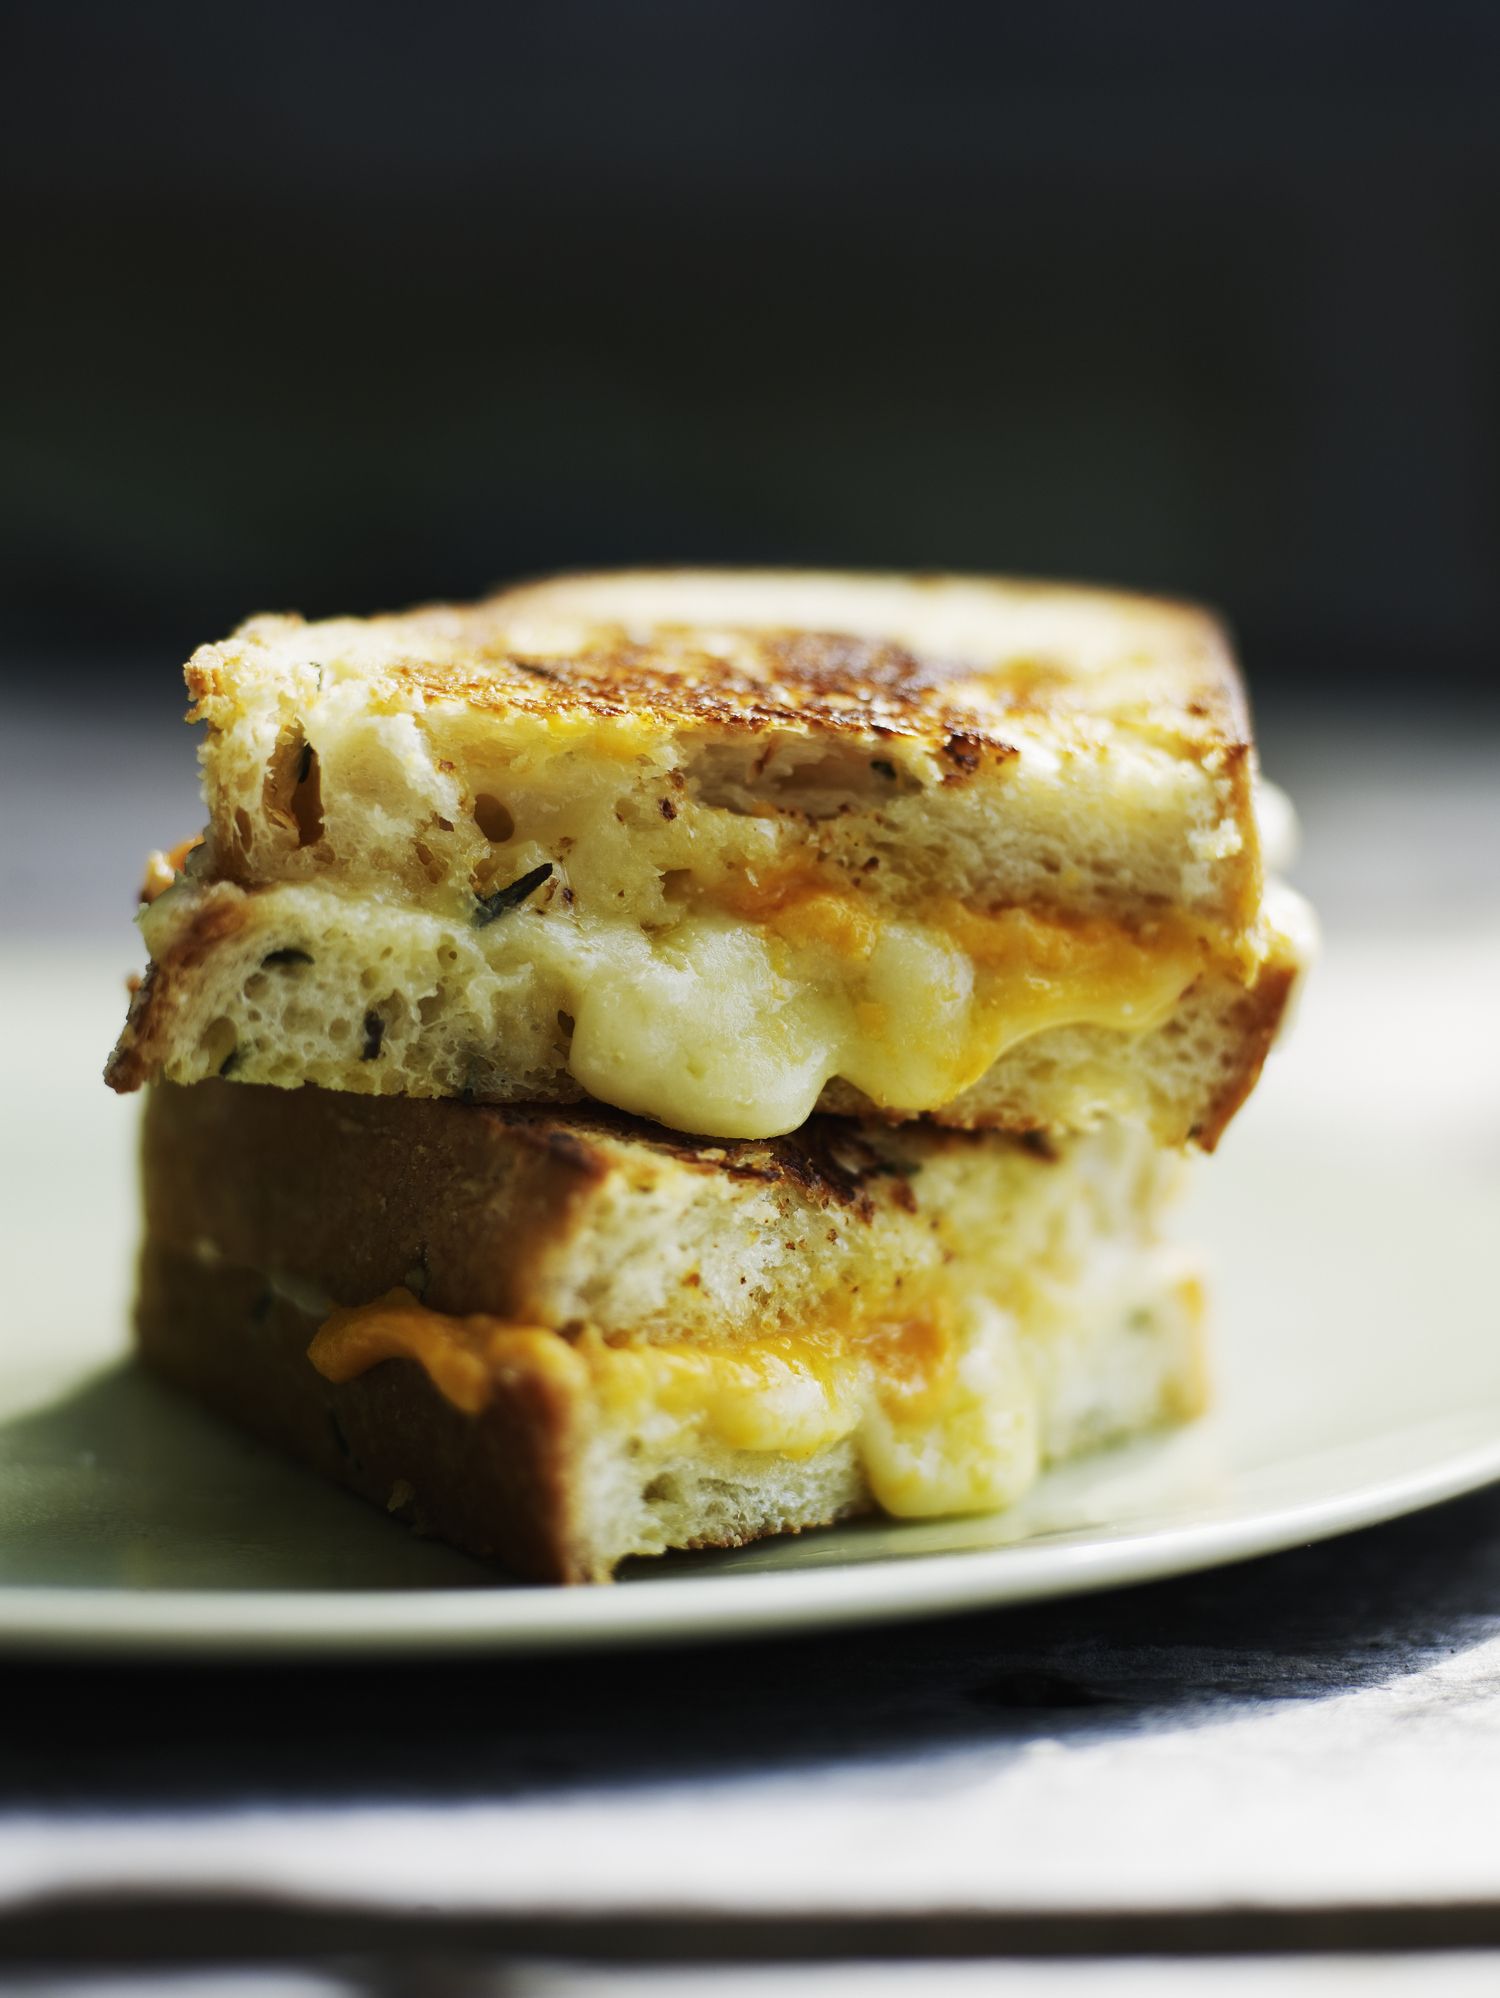 Grilled cheese with aged cheddar on rosemary bread